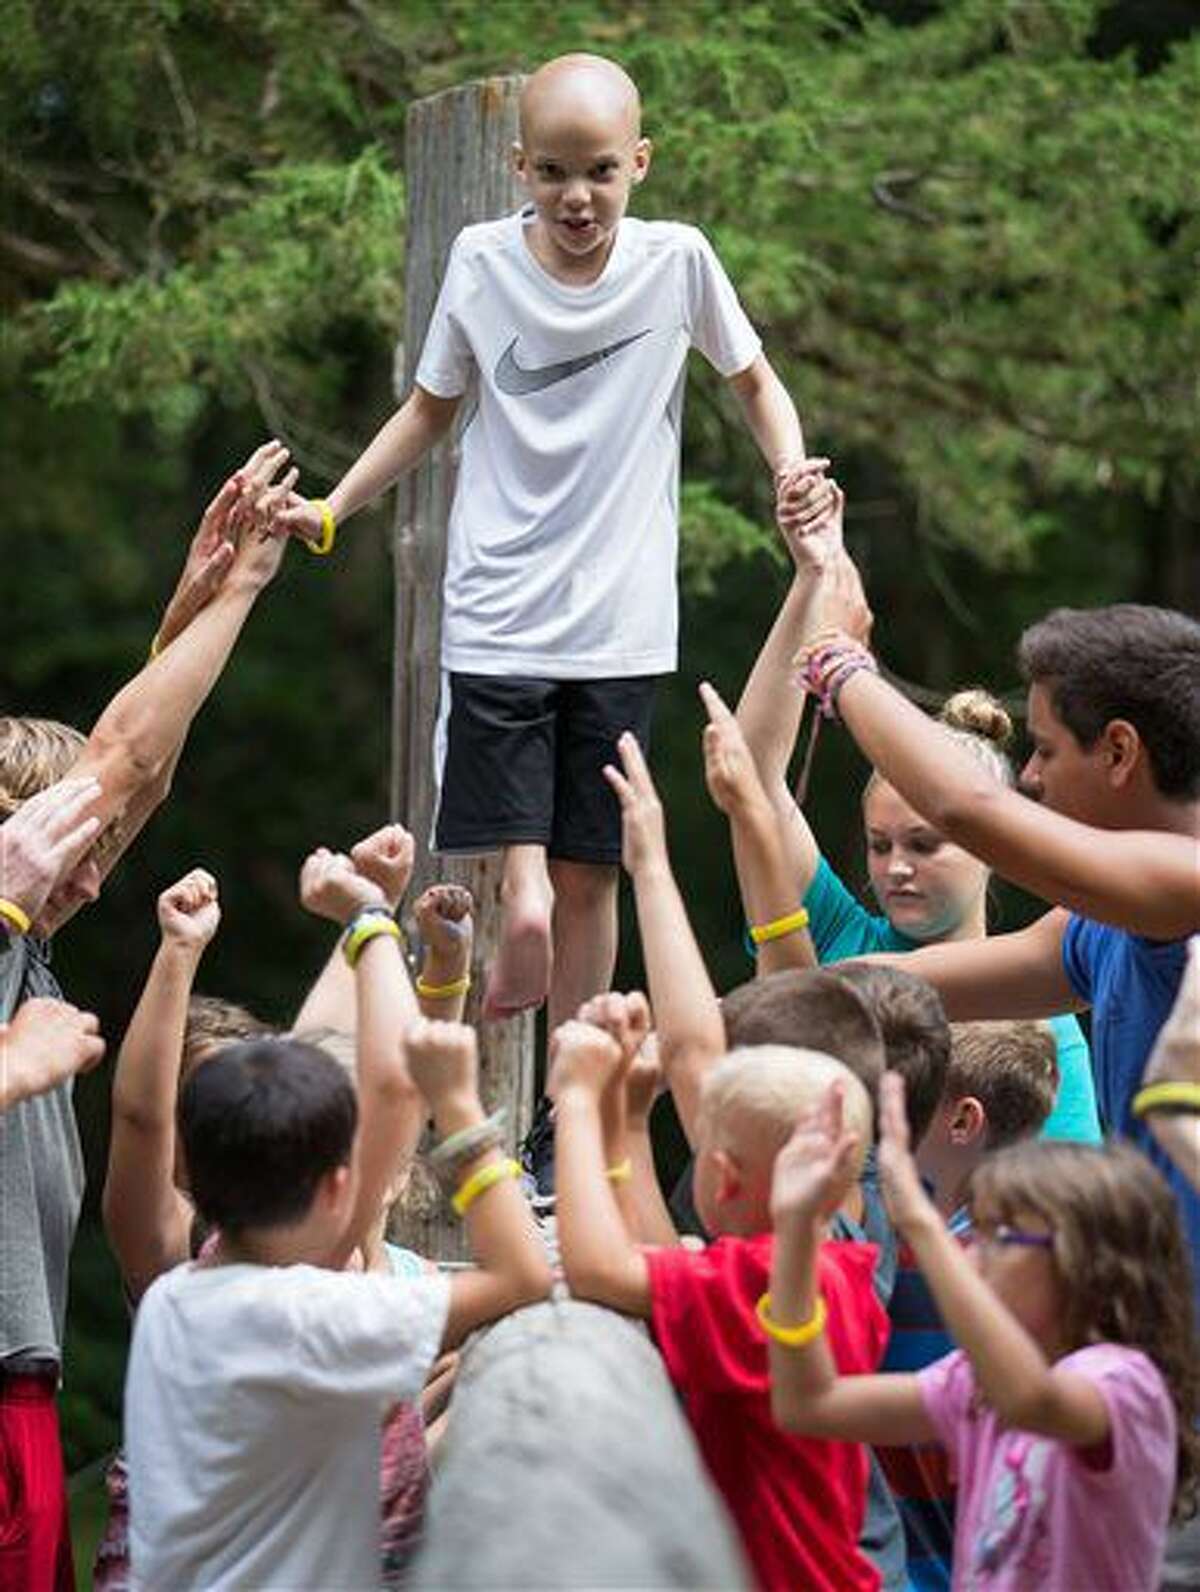 FOR RELEASE SATURDAY, AUGUST 6, 2016, AT 12:01 A.M. CDT.- Aiden Solon walks a balance beam with the help of other campers during camp CoHoLo held at the Eastern Nebraska 4-H Center Monday, July 25, 2016, in Gretna, Neb. (Matt Dixon/The World-Herald via AP)